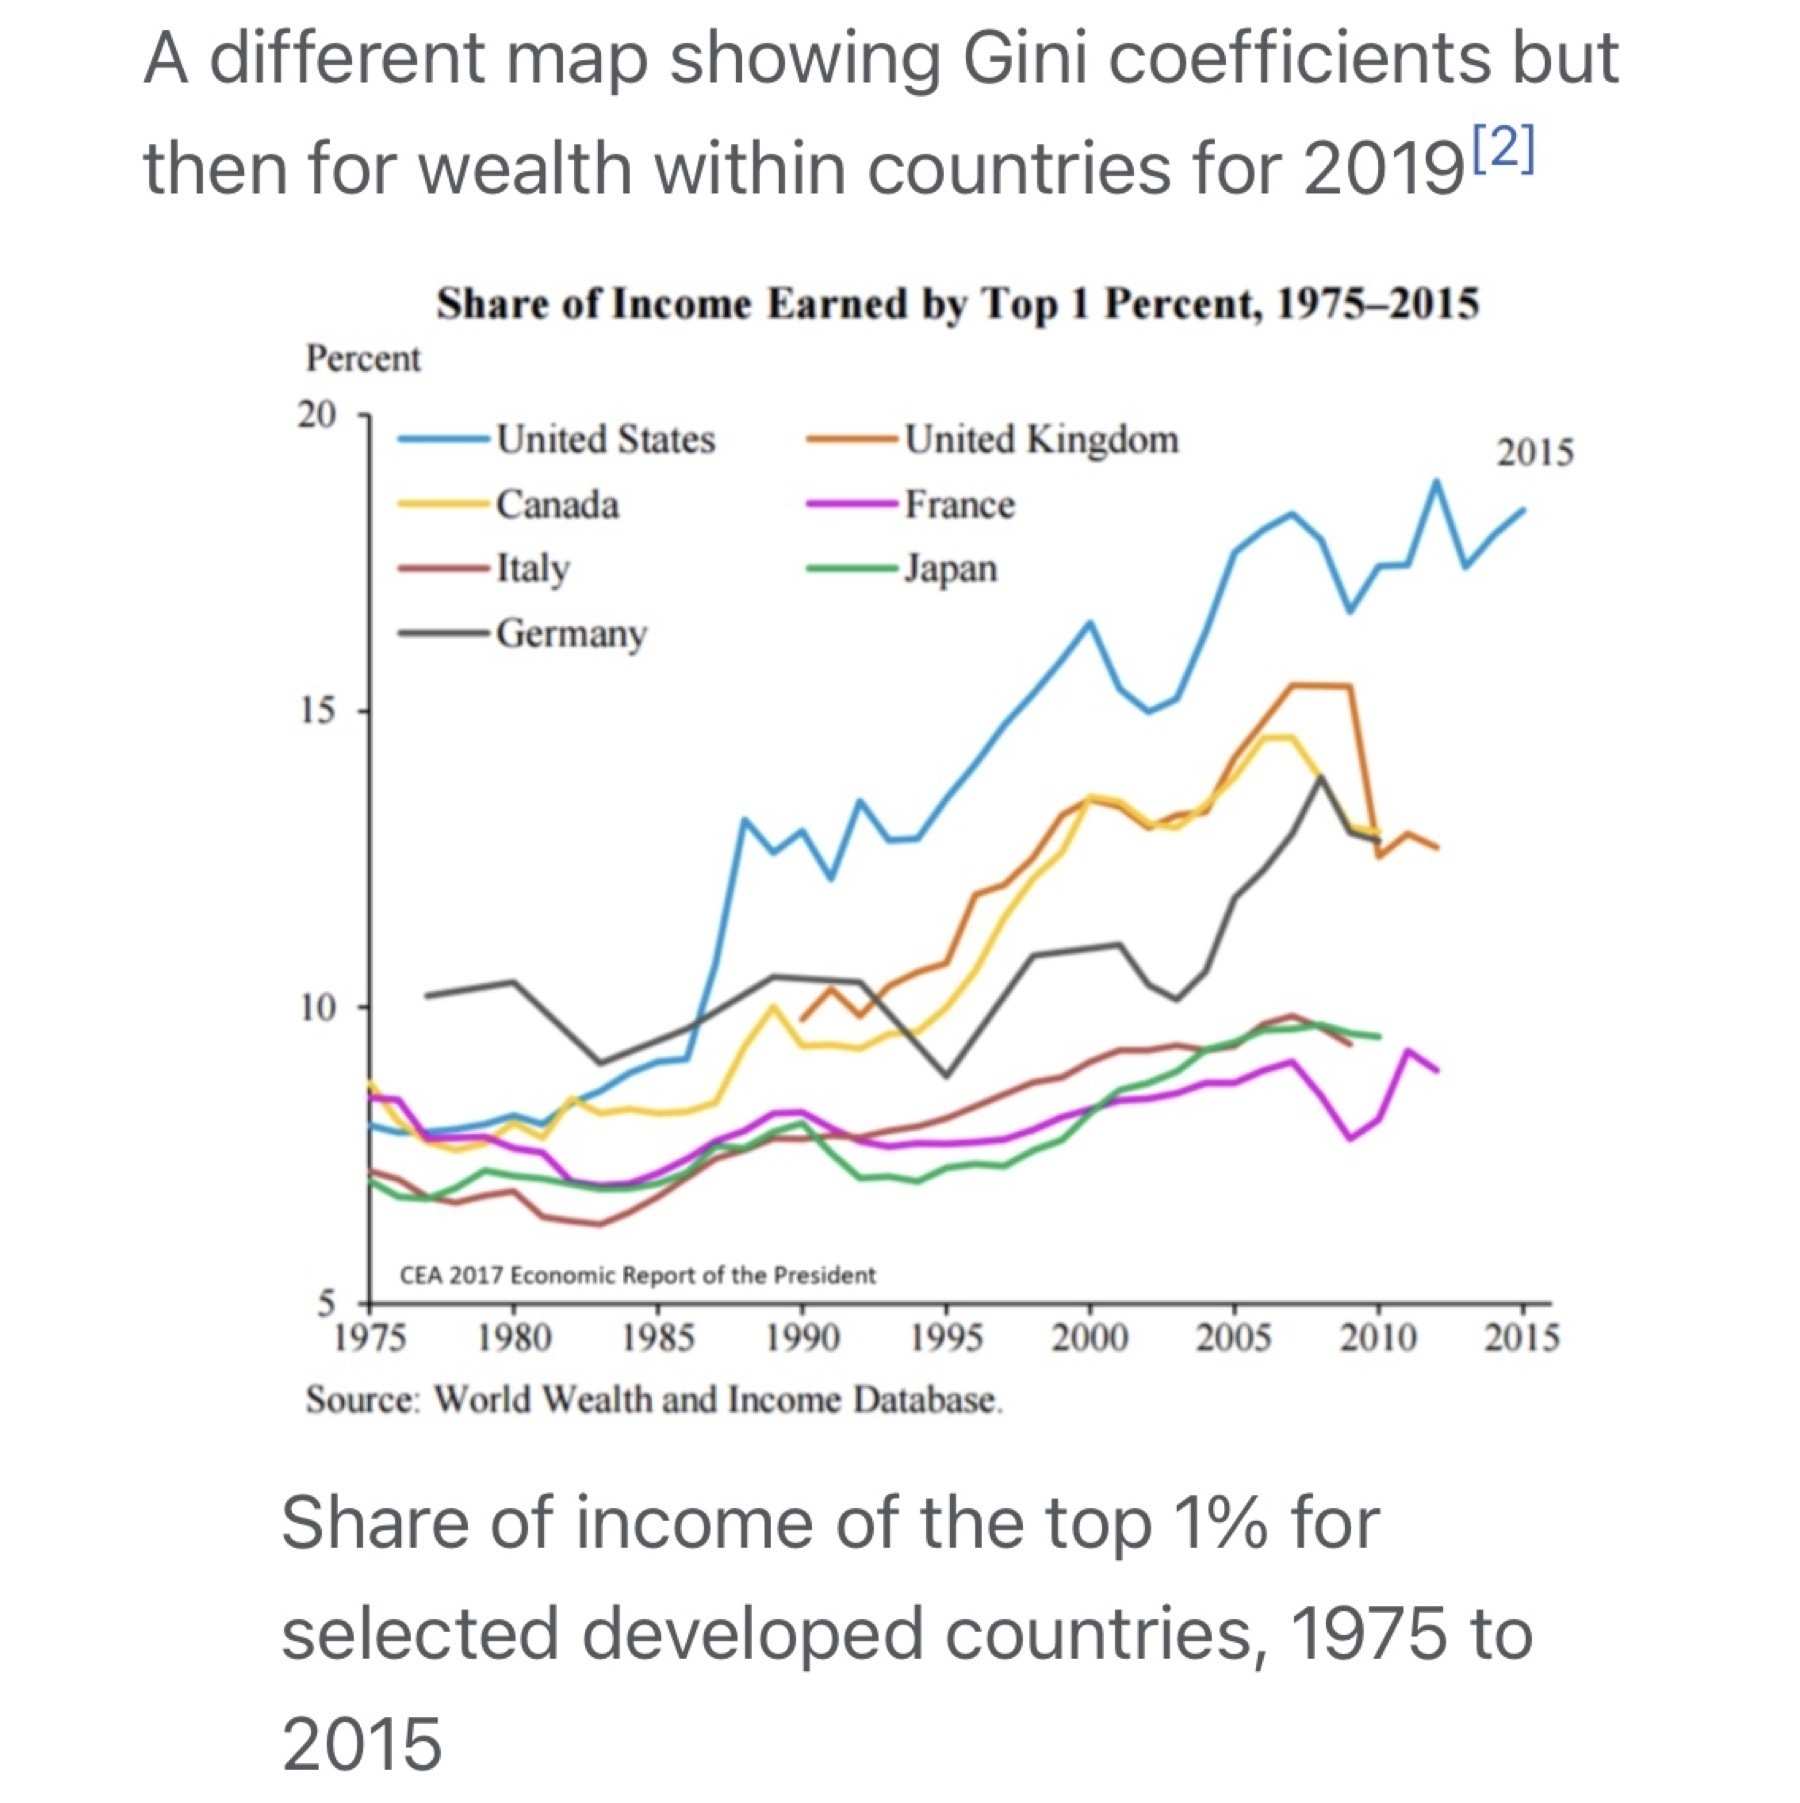 A different map showing Gini coefficients but then for wealth within countries for 2019